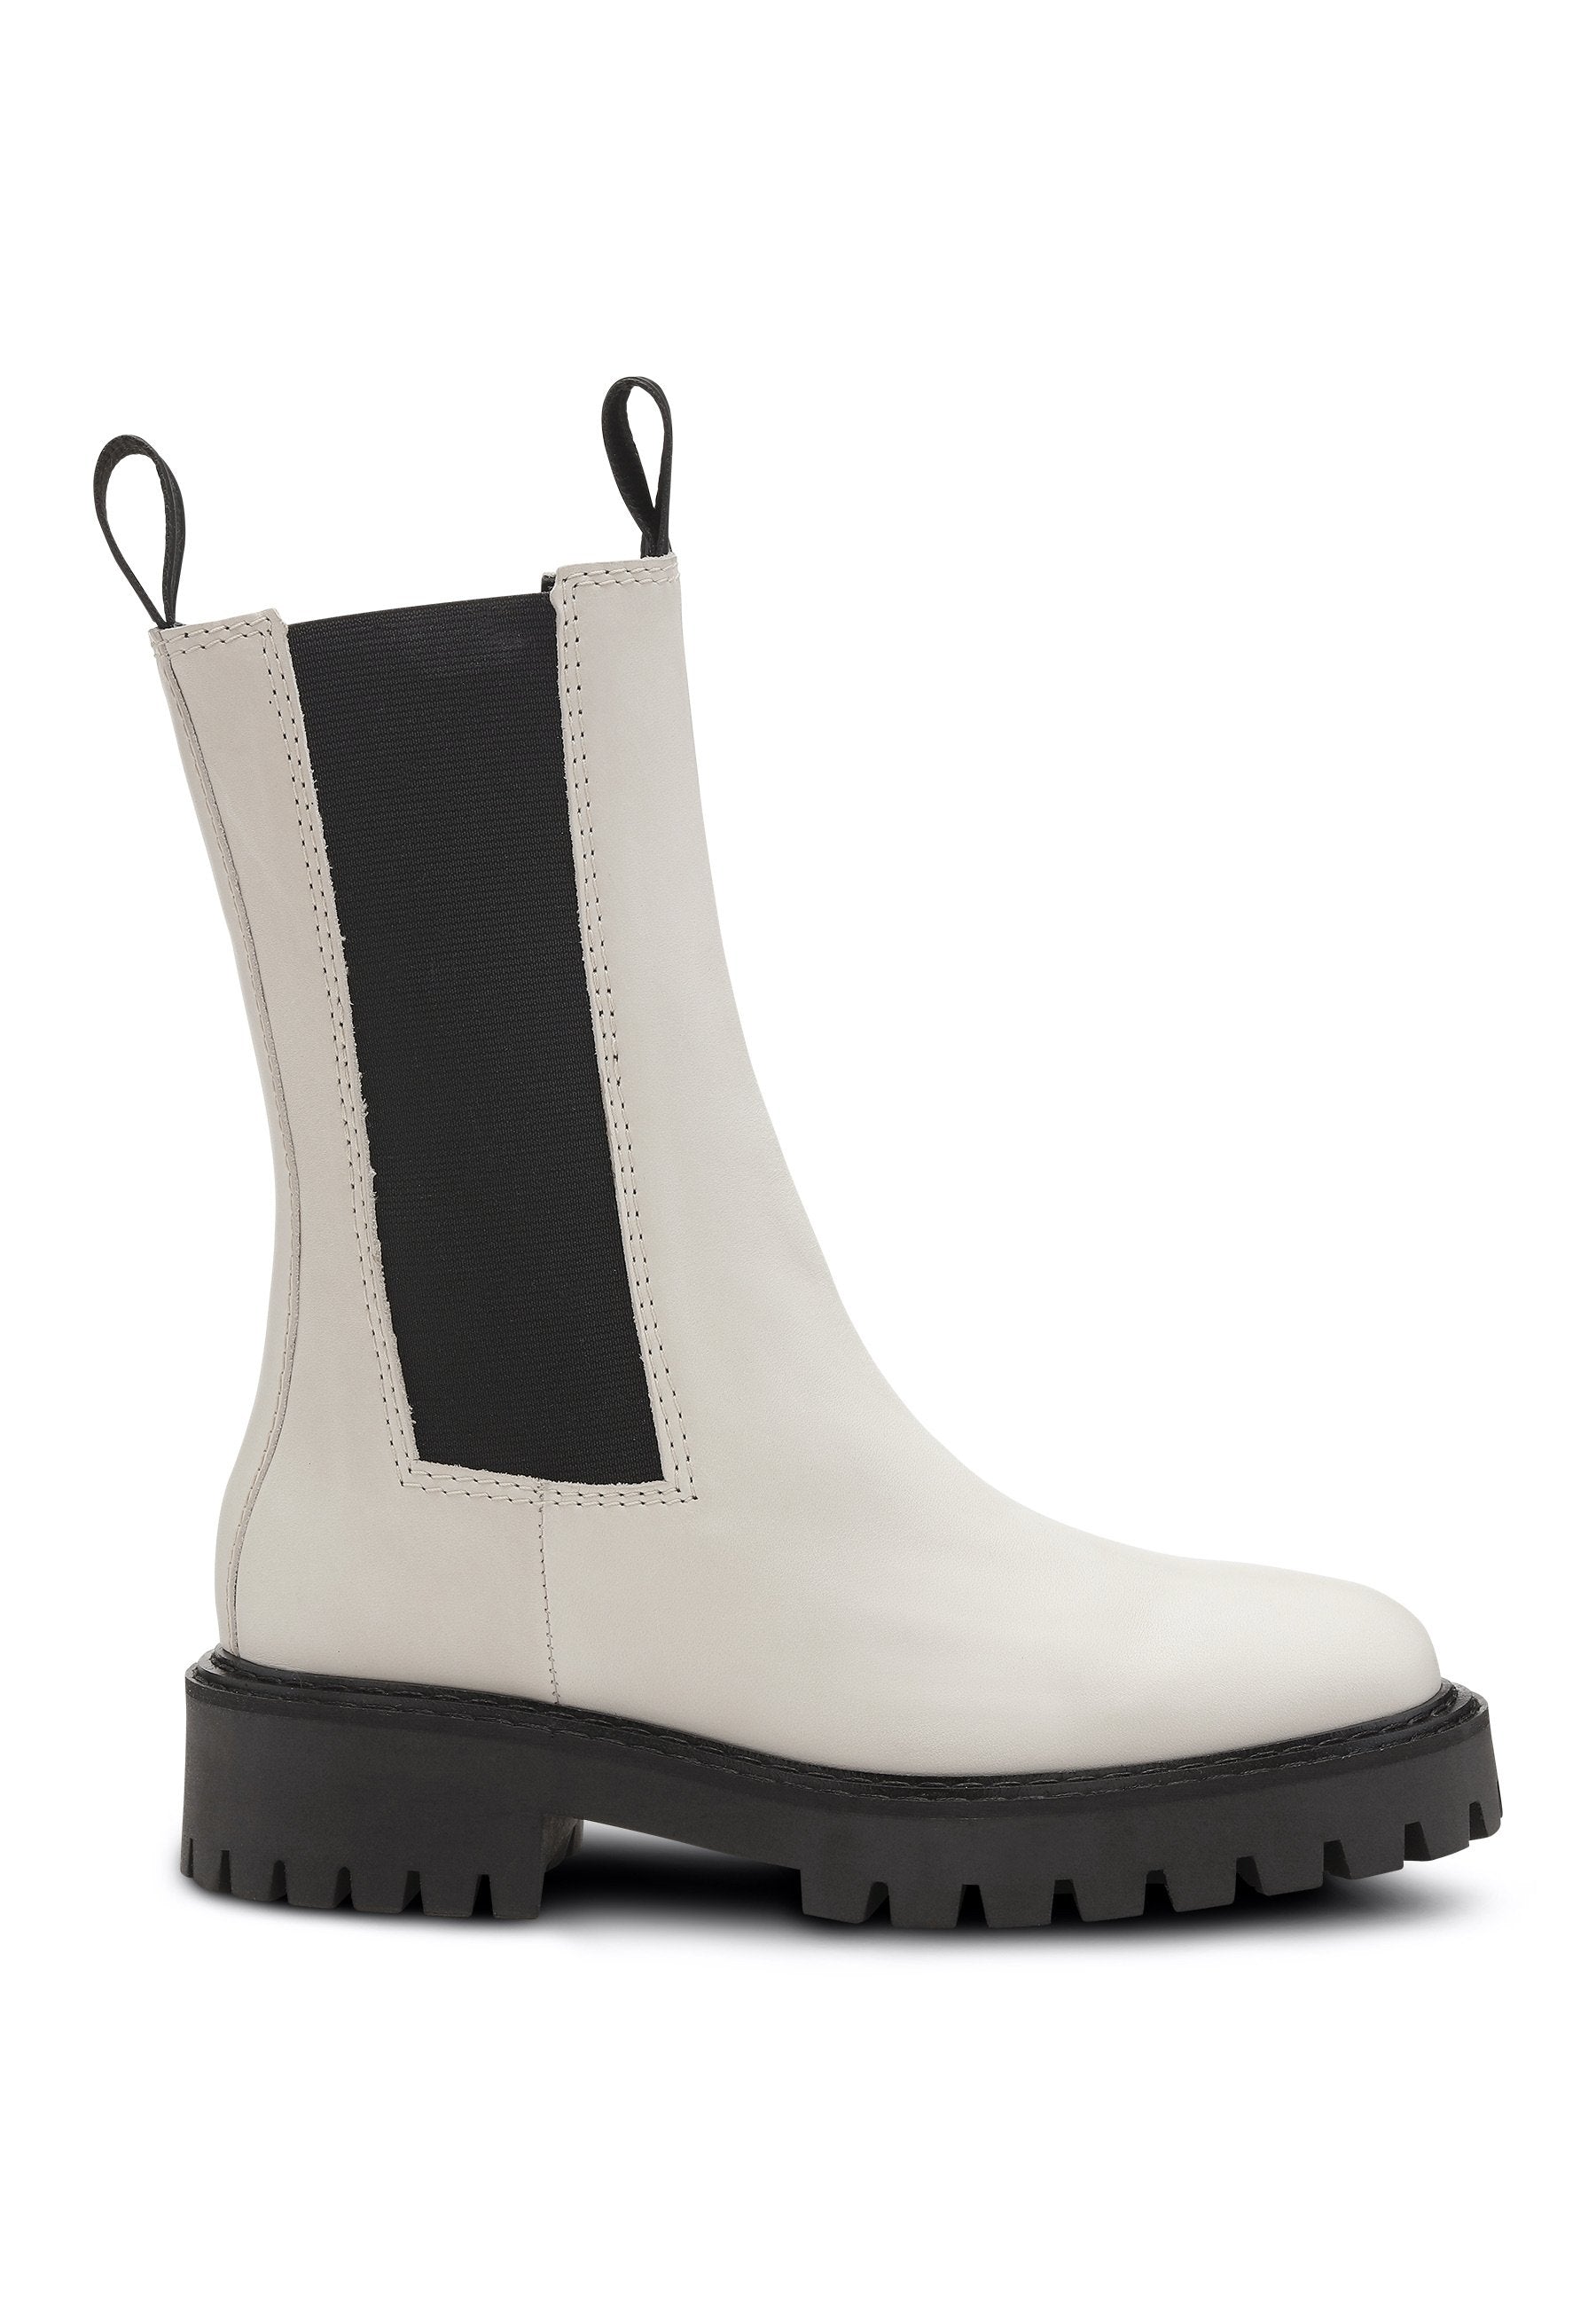 Angie Chelsea Off White Boots LAST1283 - 6